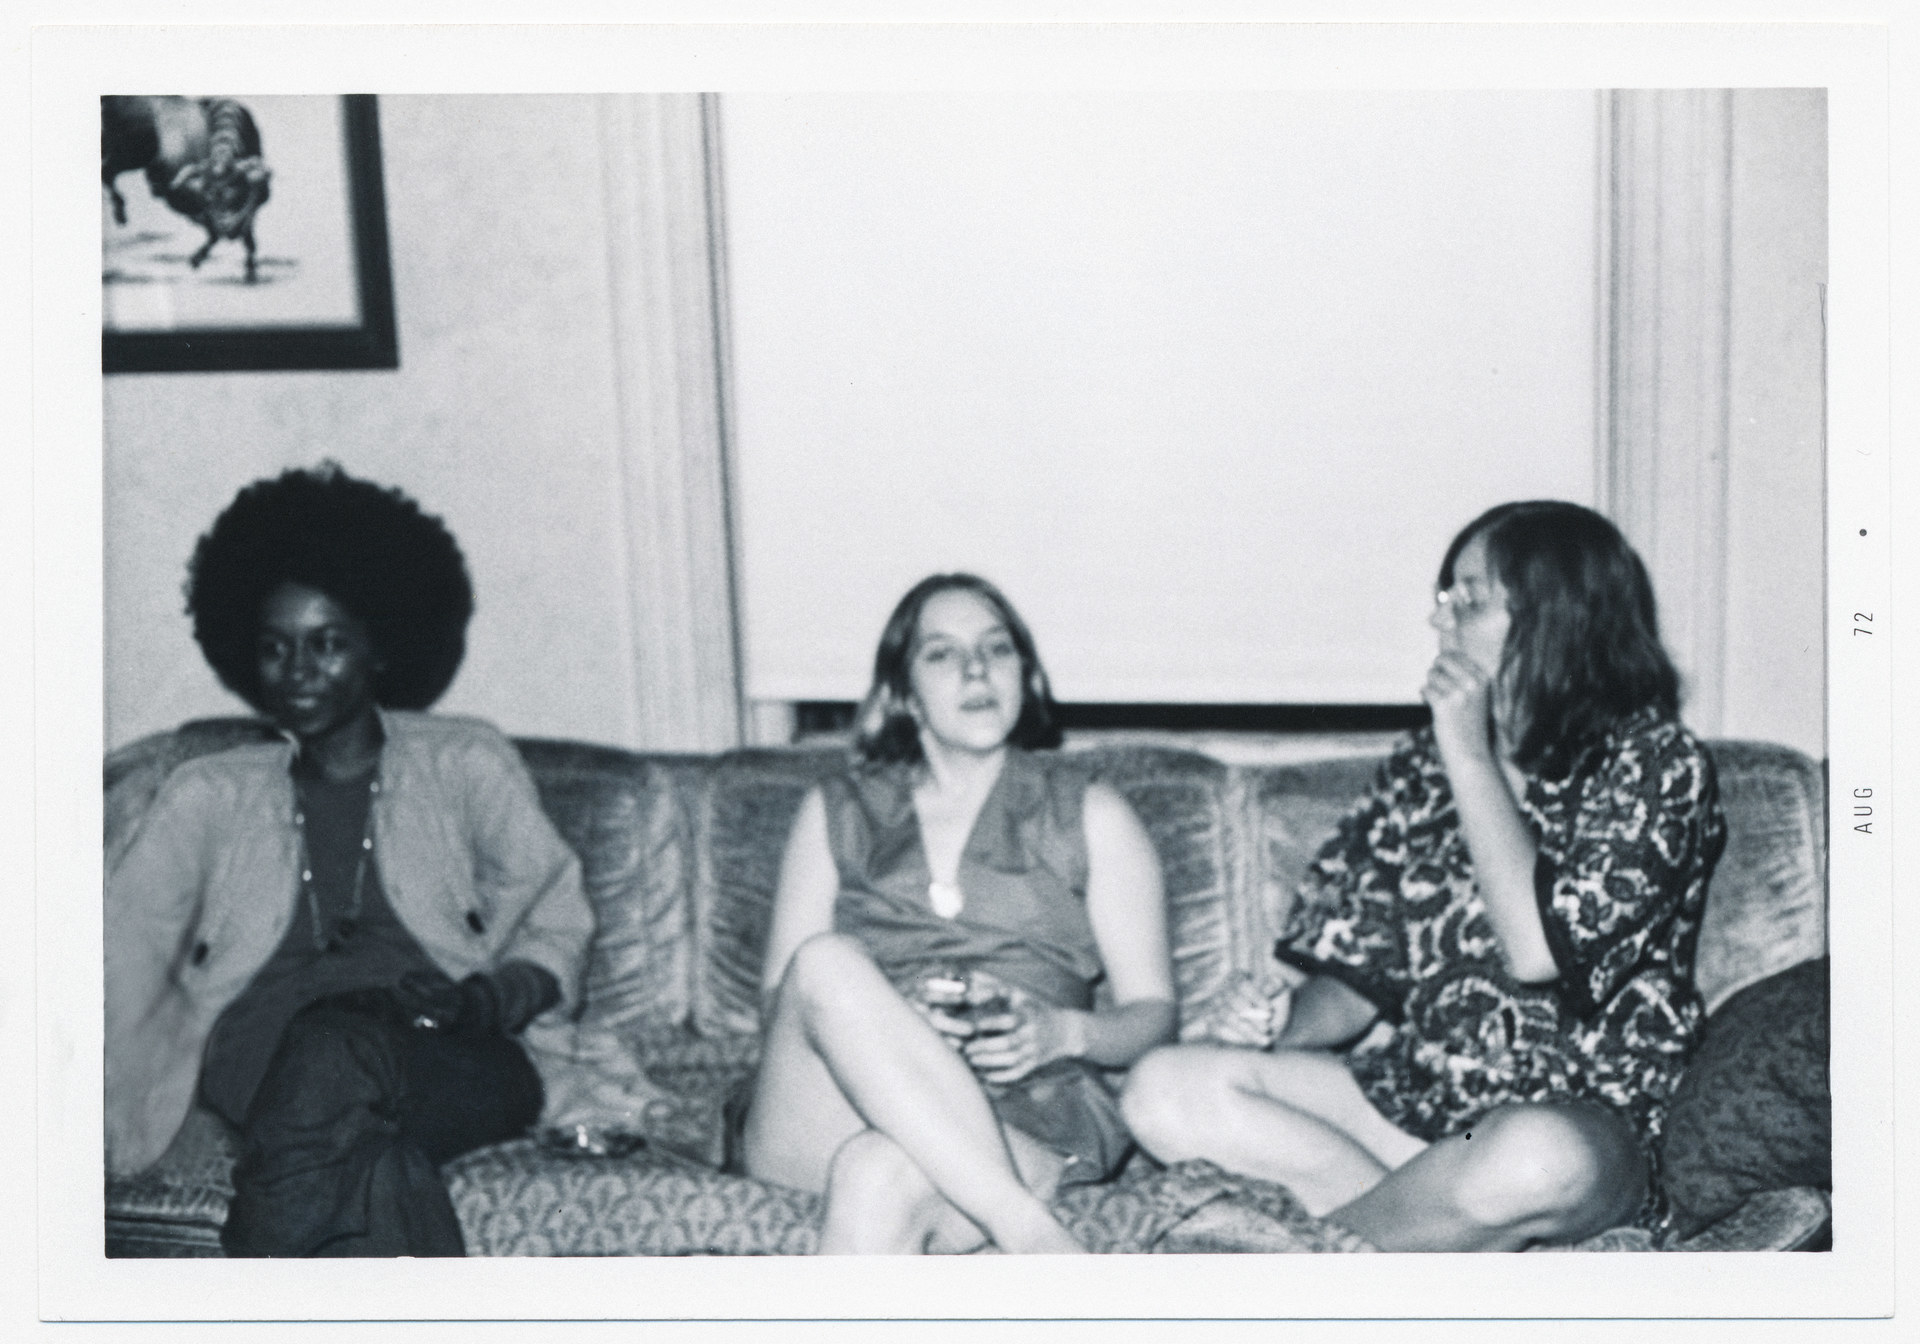 Three women sit on a couch